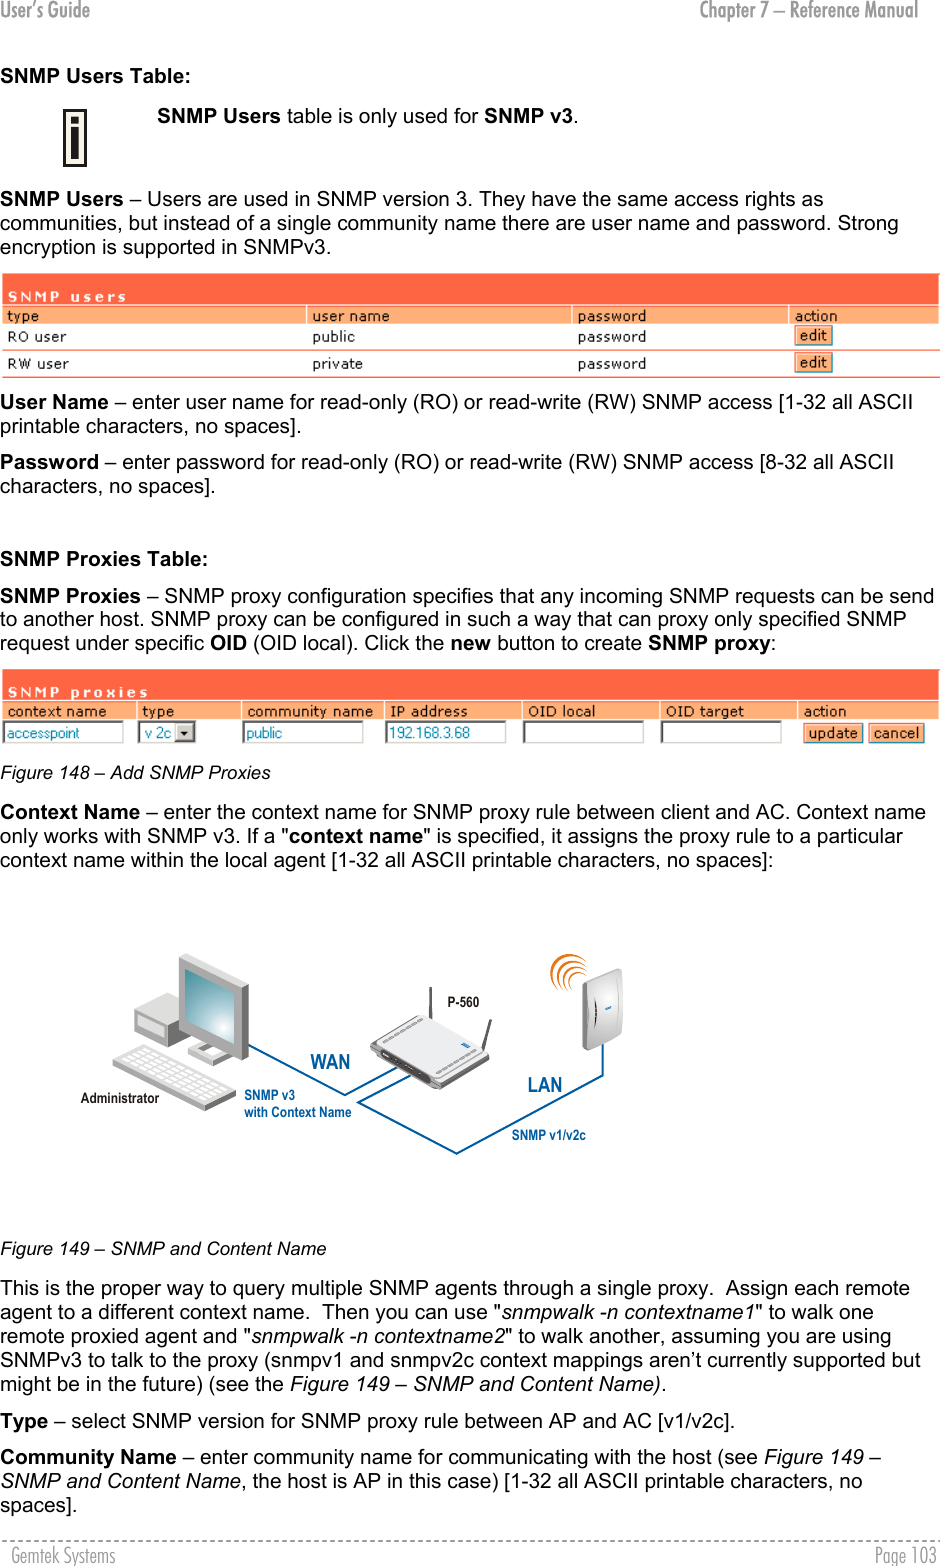 User’s Guide  Chapter 7 – Reference Manual SNMP Users Table:  SNMP Users table is only used for SNMP v3. SNMP Users – Users are used in SNMP version 3. They have the same access rights as communities, but instead of a single community name there are user name and password. Strong encryption is supported in SNMPv3.  User Name – enter user name for read-only (RO) or read-write (RW) SNMP access [1-32 all ASCII printable characters, no spaces]. Password – enter password for read-only (RO) or read-write (RW) SNMP access [8-32 all ASCII characters, no spaces].  SNMP Proxies Table: SNMP Proxies – SNMP proxy configuration specifies that any incoming SNMP requests can be send to another host. SNMP proxy can be configured in such a way that can proxy only specified SNMP request under specific OID (OID local). Click the new button to create SNMP proxy:  Figure 148 – Add SNMP Proxies Context Name – enter the context name for SNMP proxy rule between client and AC. Context name only works with SNMP v3. If a &quot;context name&quot; is specified, it assigns the proxy rule to a particular context name within the local agent [1-32 all ASCII printable characters, no spaces]: P-560AdministratorLANWANSNMP v1/v2cSNMP v3with Context Name Figure 149 – SNMP and Content Name This is the proper way to query multiple SNMP agents through a single proxy.  Assign each remote agent to a different context name.  Then you can use &quot;snmpwalk -n contextname1&quot; to walk one remote proxied agent and &quot;snmpwalk -n contextname2&quot; to walk another, assuming you are using SNMPv3 to talk to the proxy (snmpv1 and snmpv2c context mappings aren’t currently supported but might be in the future) (see the Figure 149 – SNMP and Content Name). Type – select SNMP version for SNMP proxy rule between AP and AC [v1/v2c]. Community Name – enter community name for communicating with the host (see Figure 149 – SNMP and Content Name, the host is AP in this case) [1-32 all ASCII printable characters, no spaces]. Gemtek Systems    Page 103  